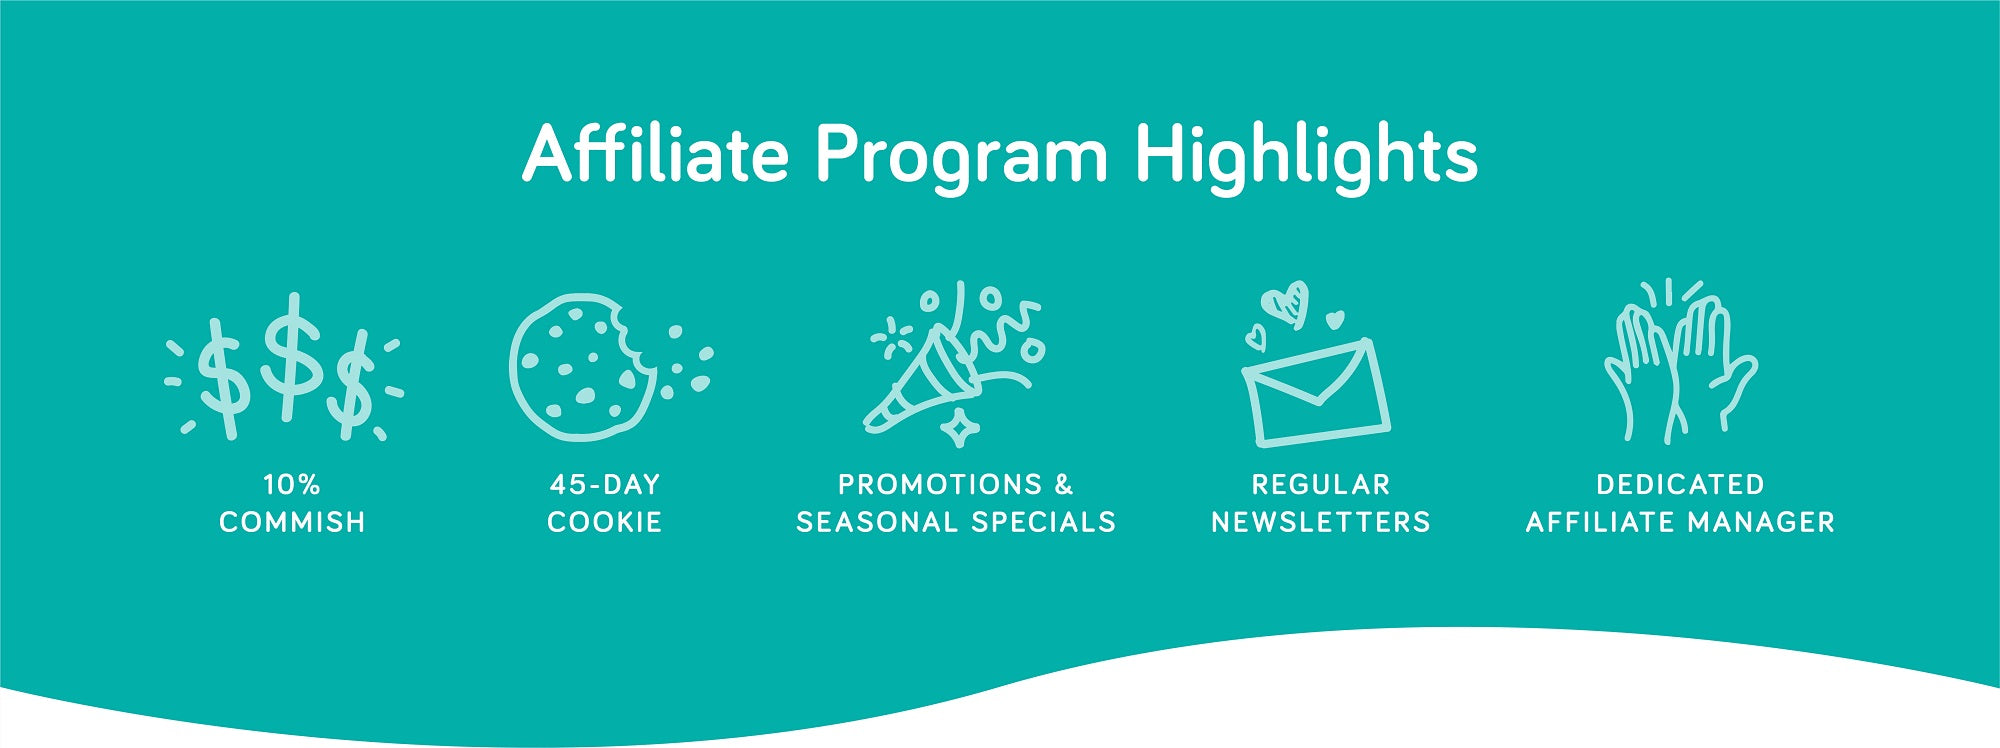 Affiliate program highlights: 10% commission, 45-day cookie, promotions and seasonal specials, regular newsletters, dedicated affiliate manager.